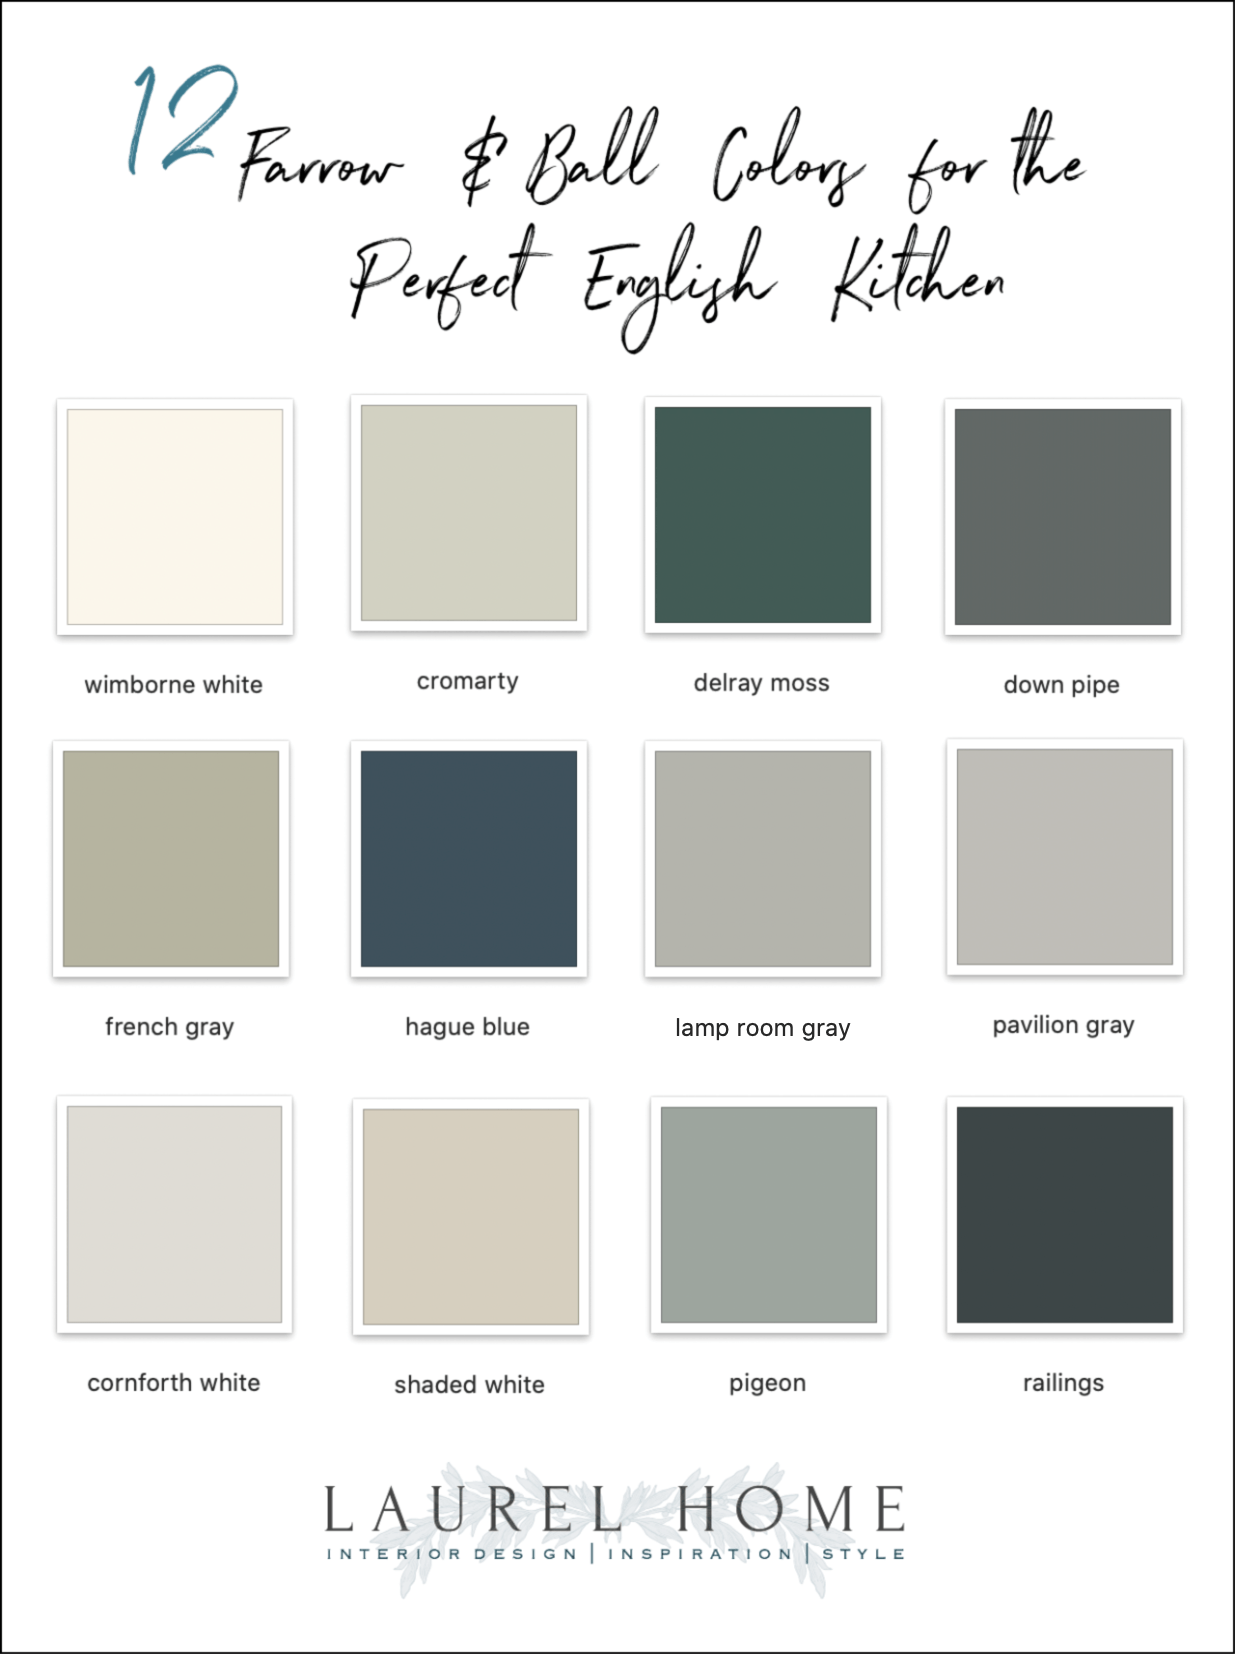 Farrow and Ball colors - perfect English Kitchen